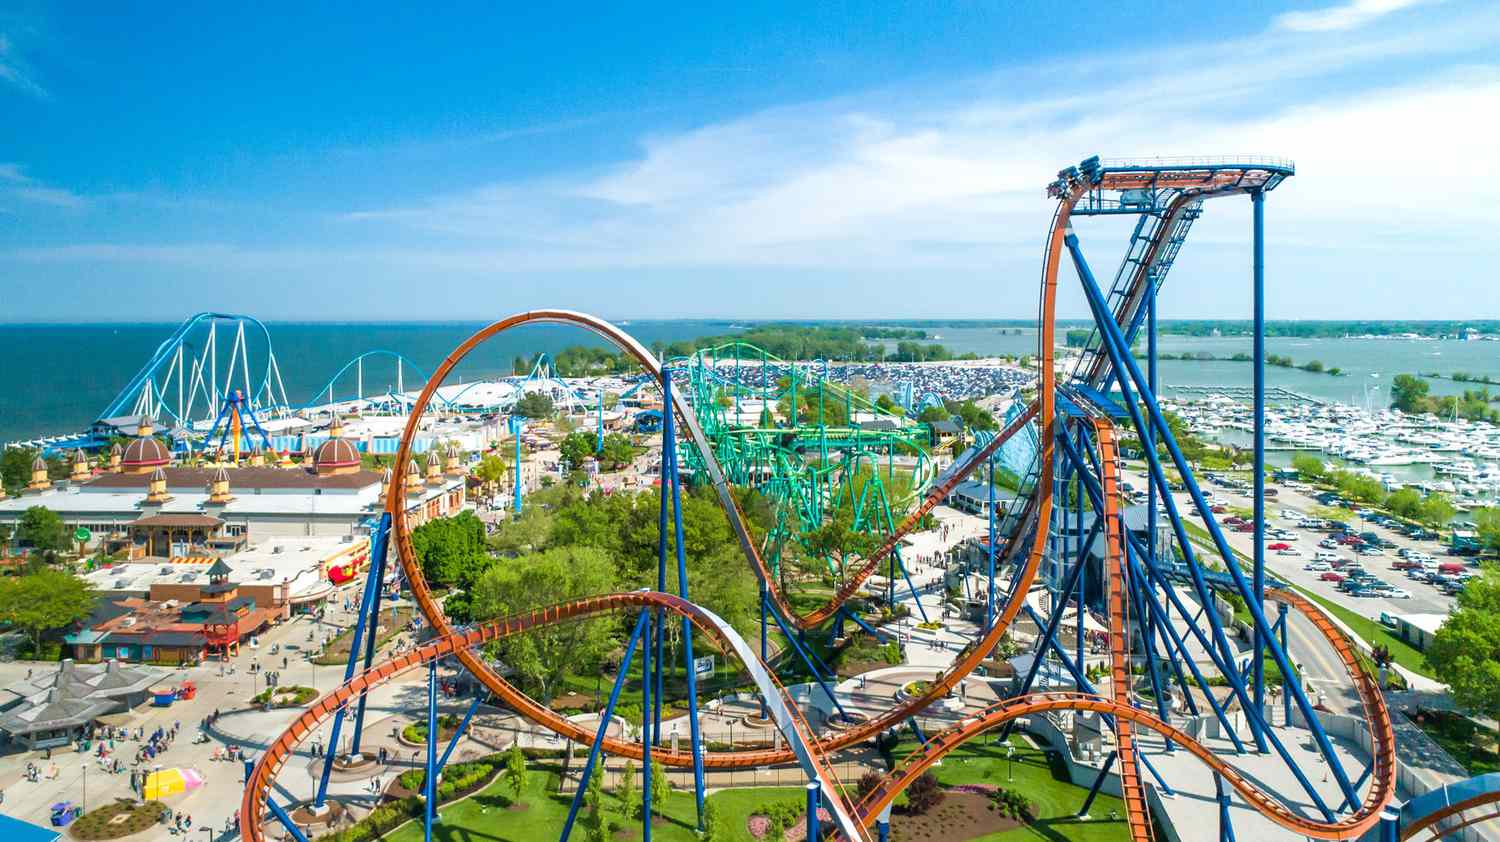 Can You Take Water Bottles Into Cedar Point?